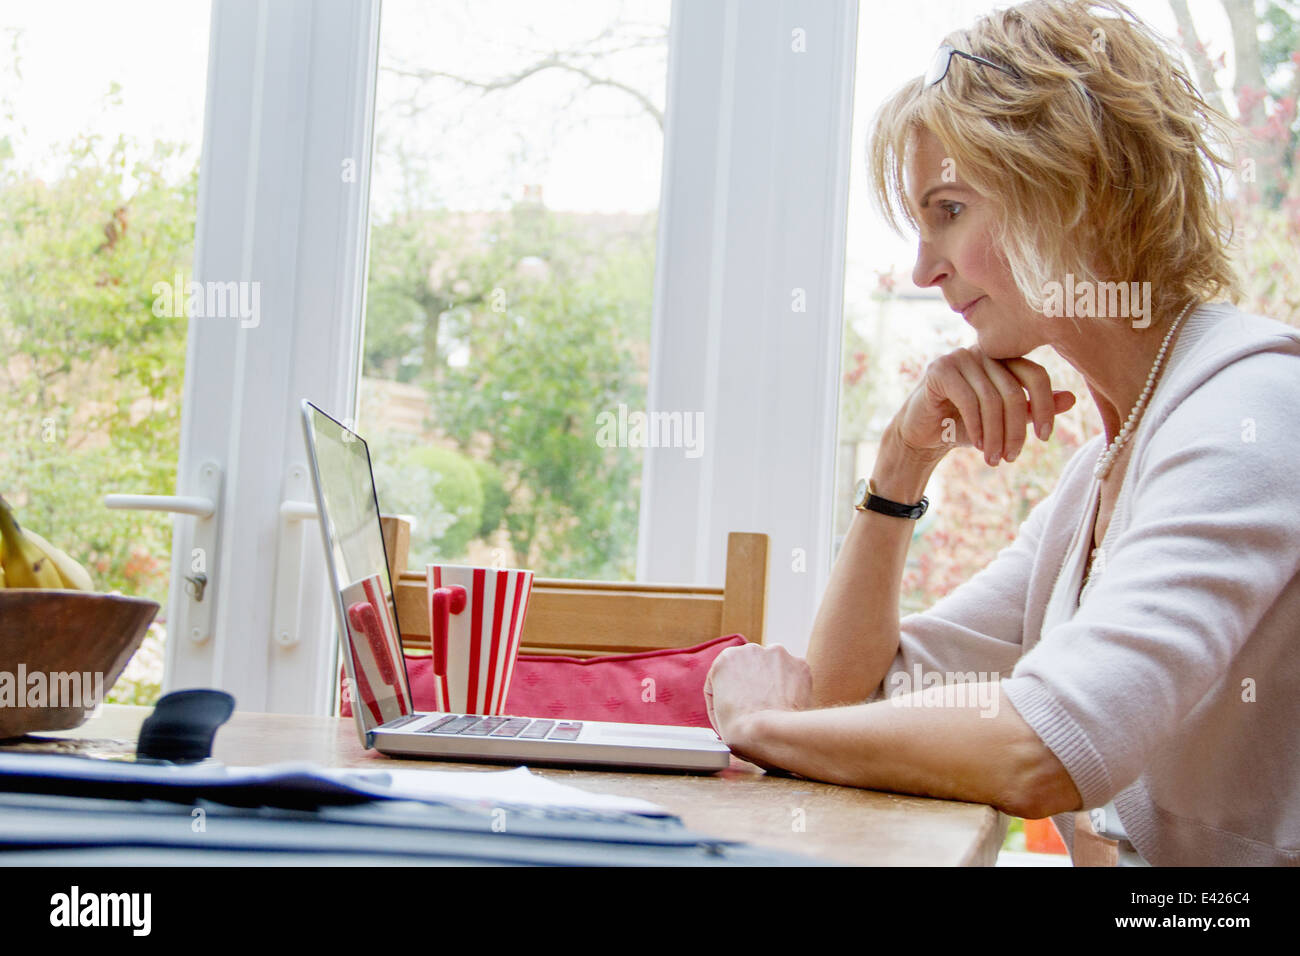 Mature woman using laptop in kitchen Stock Photo